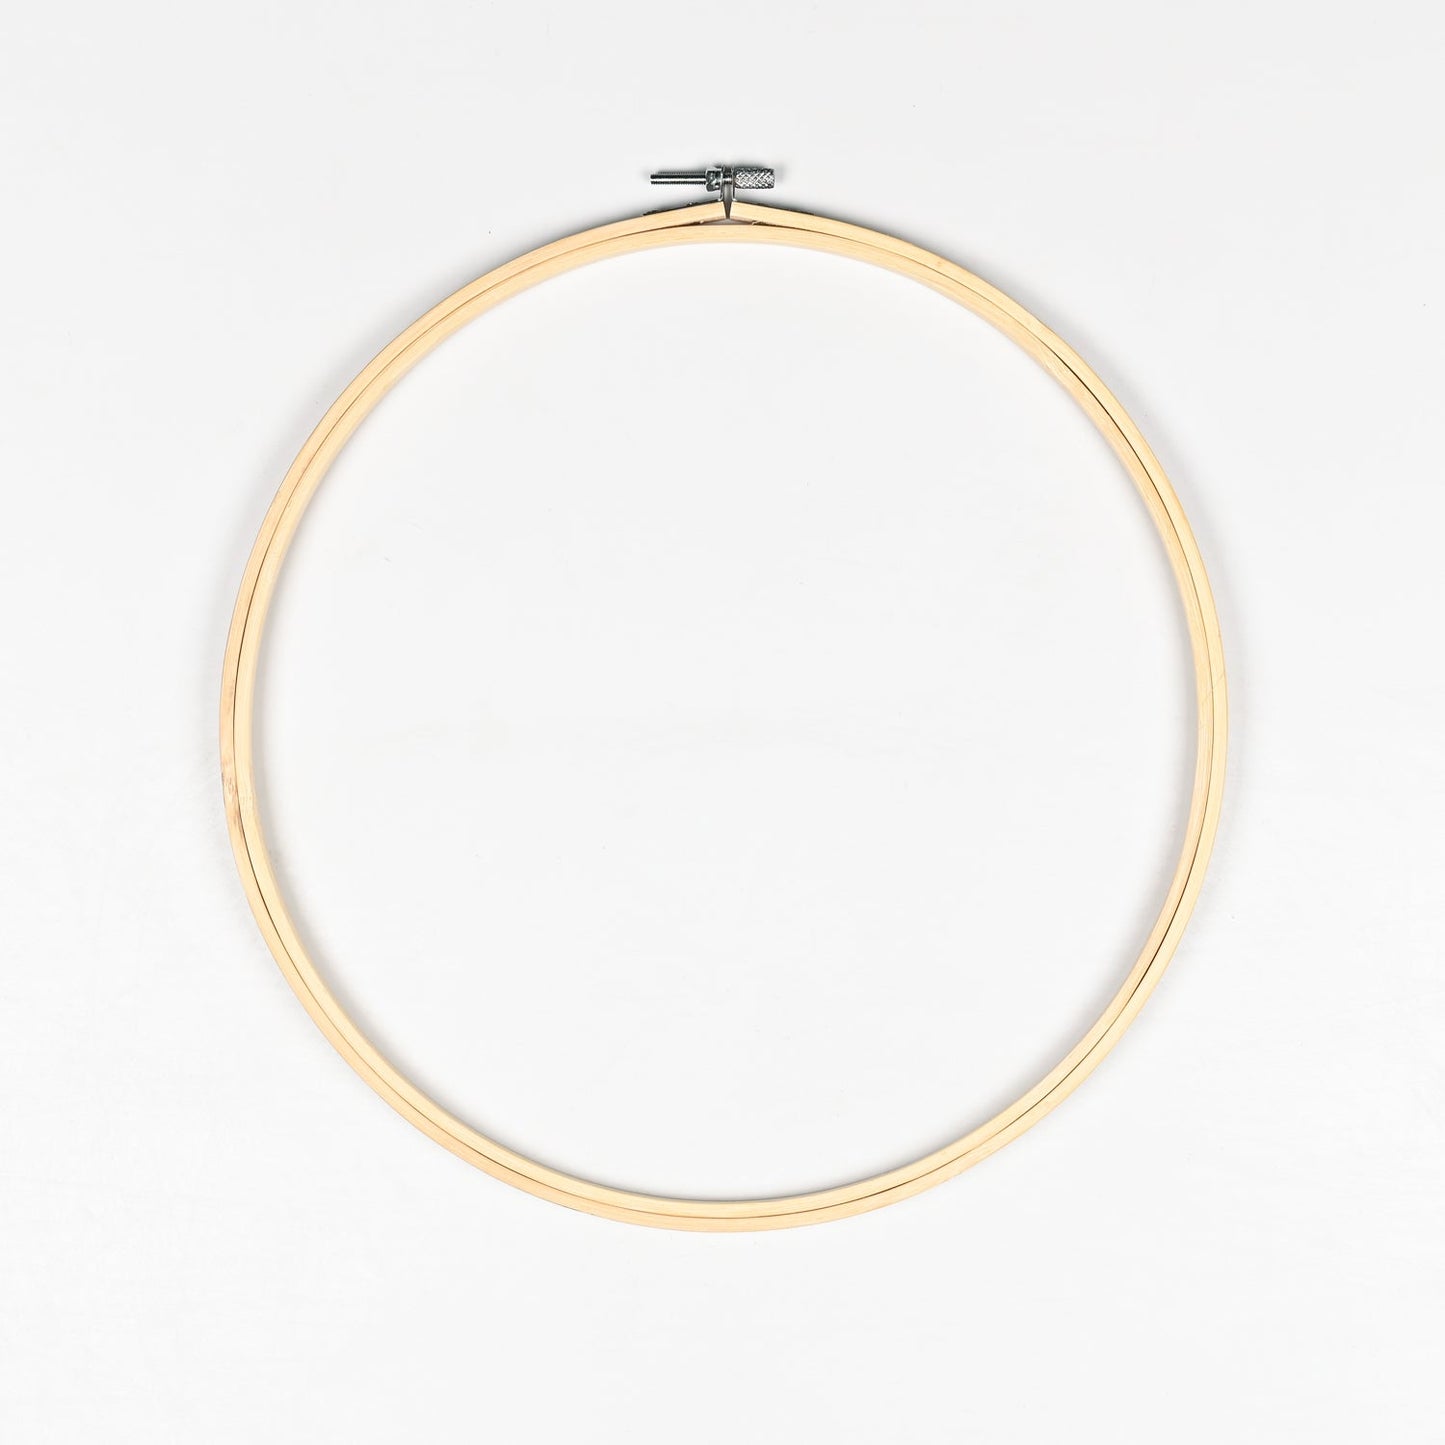 Embroidery Hoops Wooden - 10" / 25cm